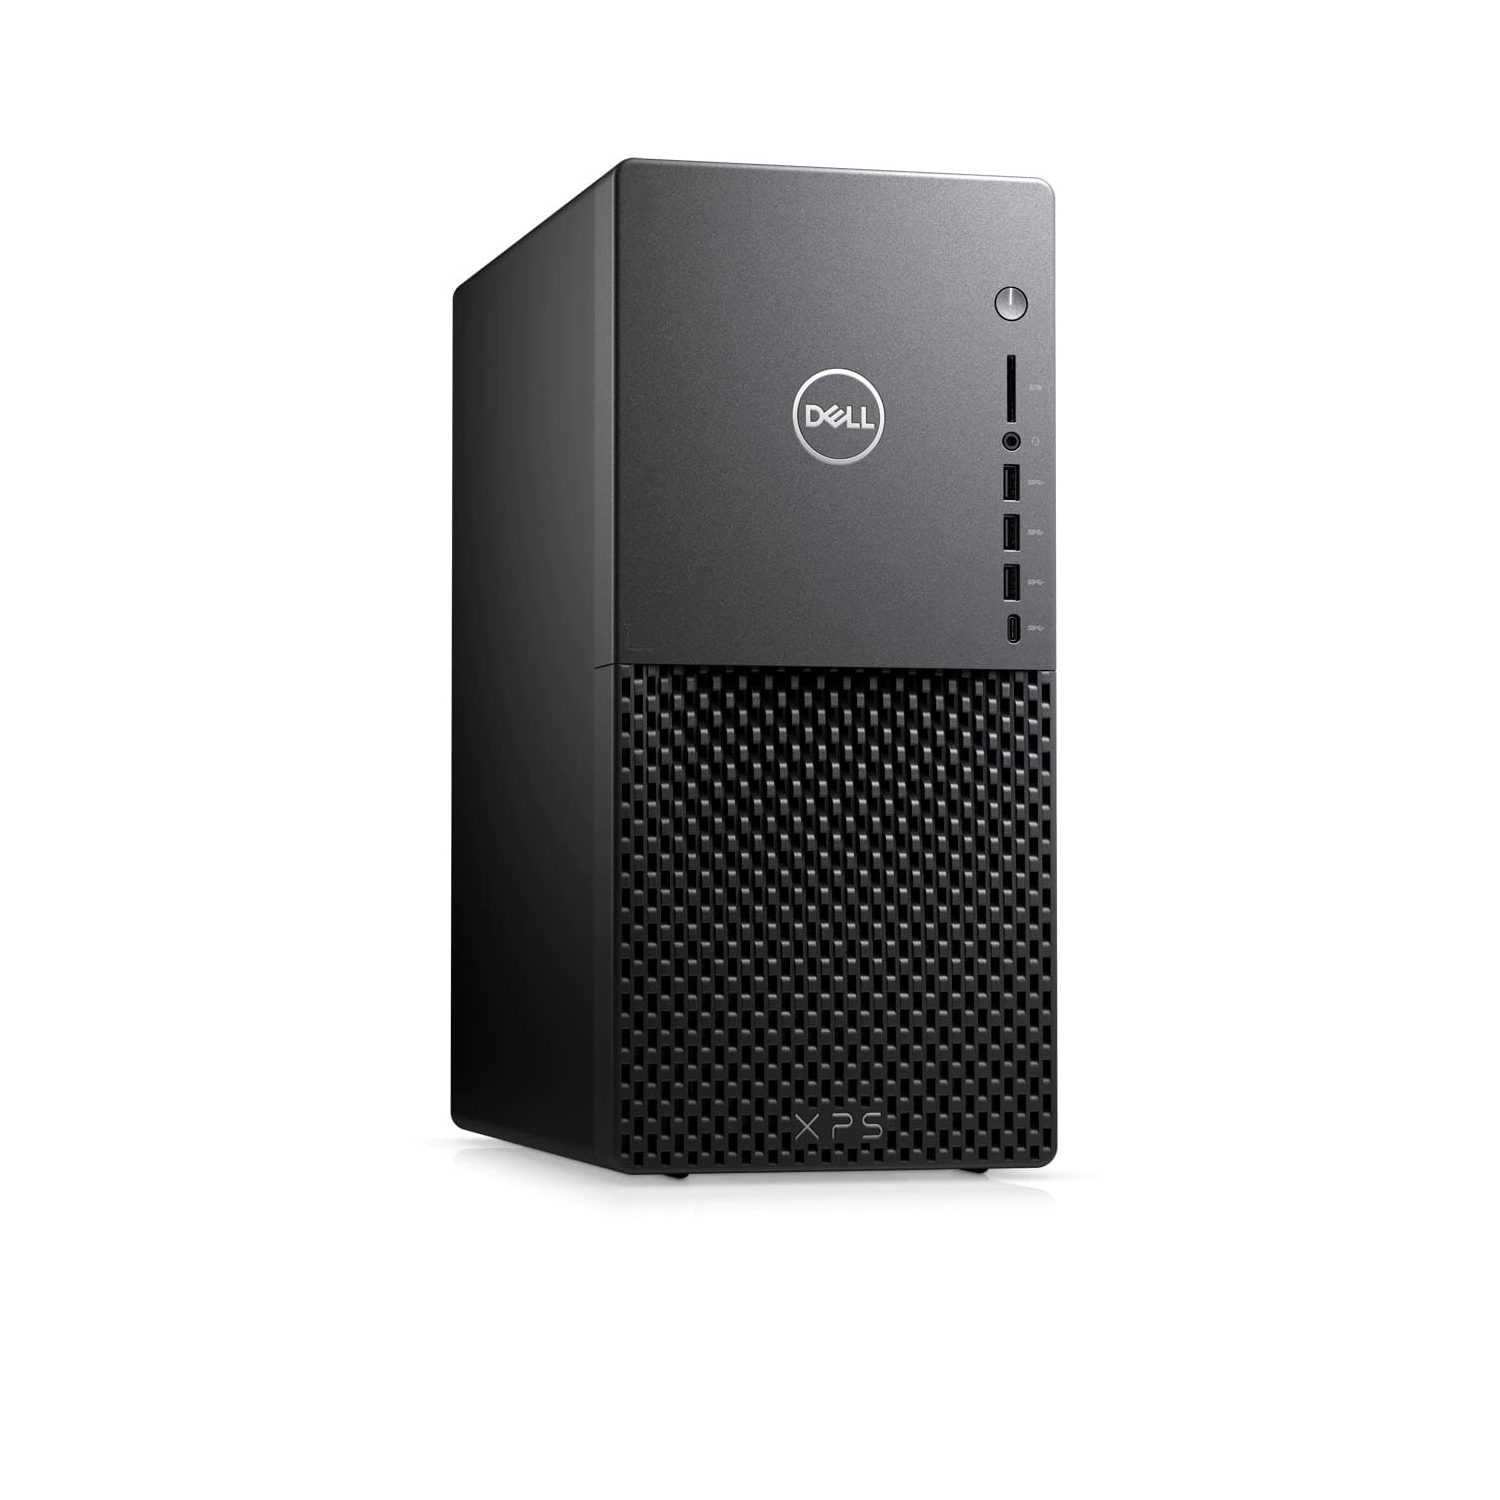 Refurbished (Excellent) - Dell XPS 8940 Desktop (2020) | Core i7 - 1TB SSD - 16GB RAM - 1660 Ti | 8 Cores @ 4.8 GHz - 10th Gen CPU Certified Refurbished